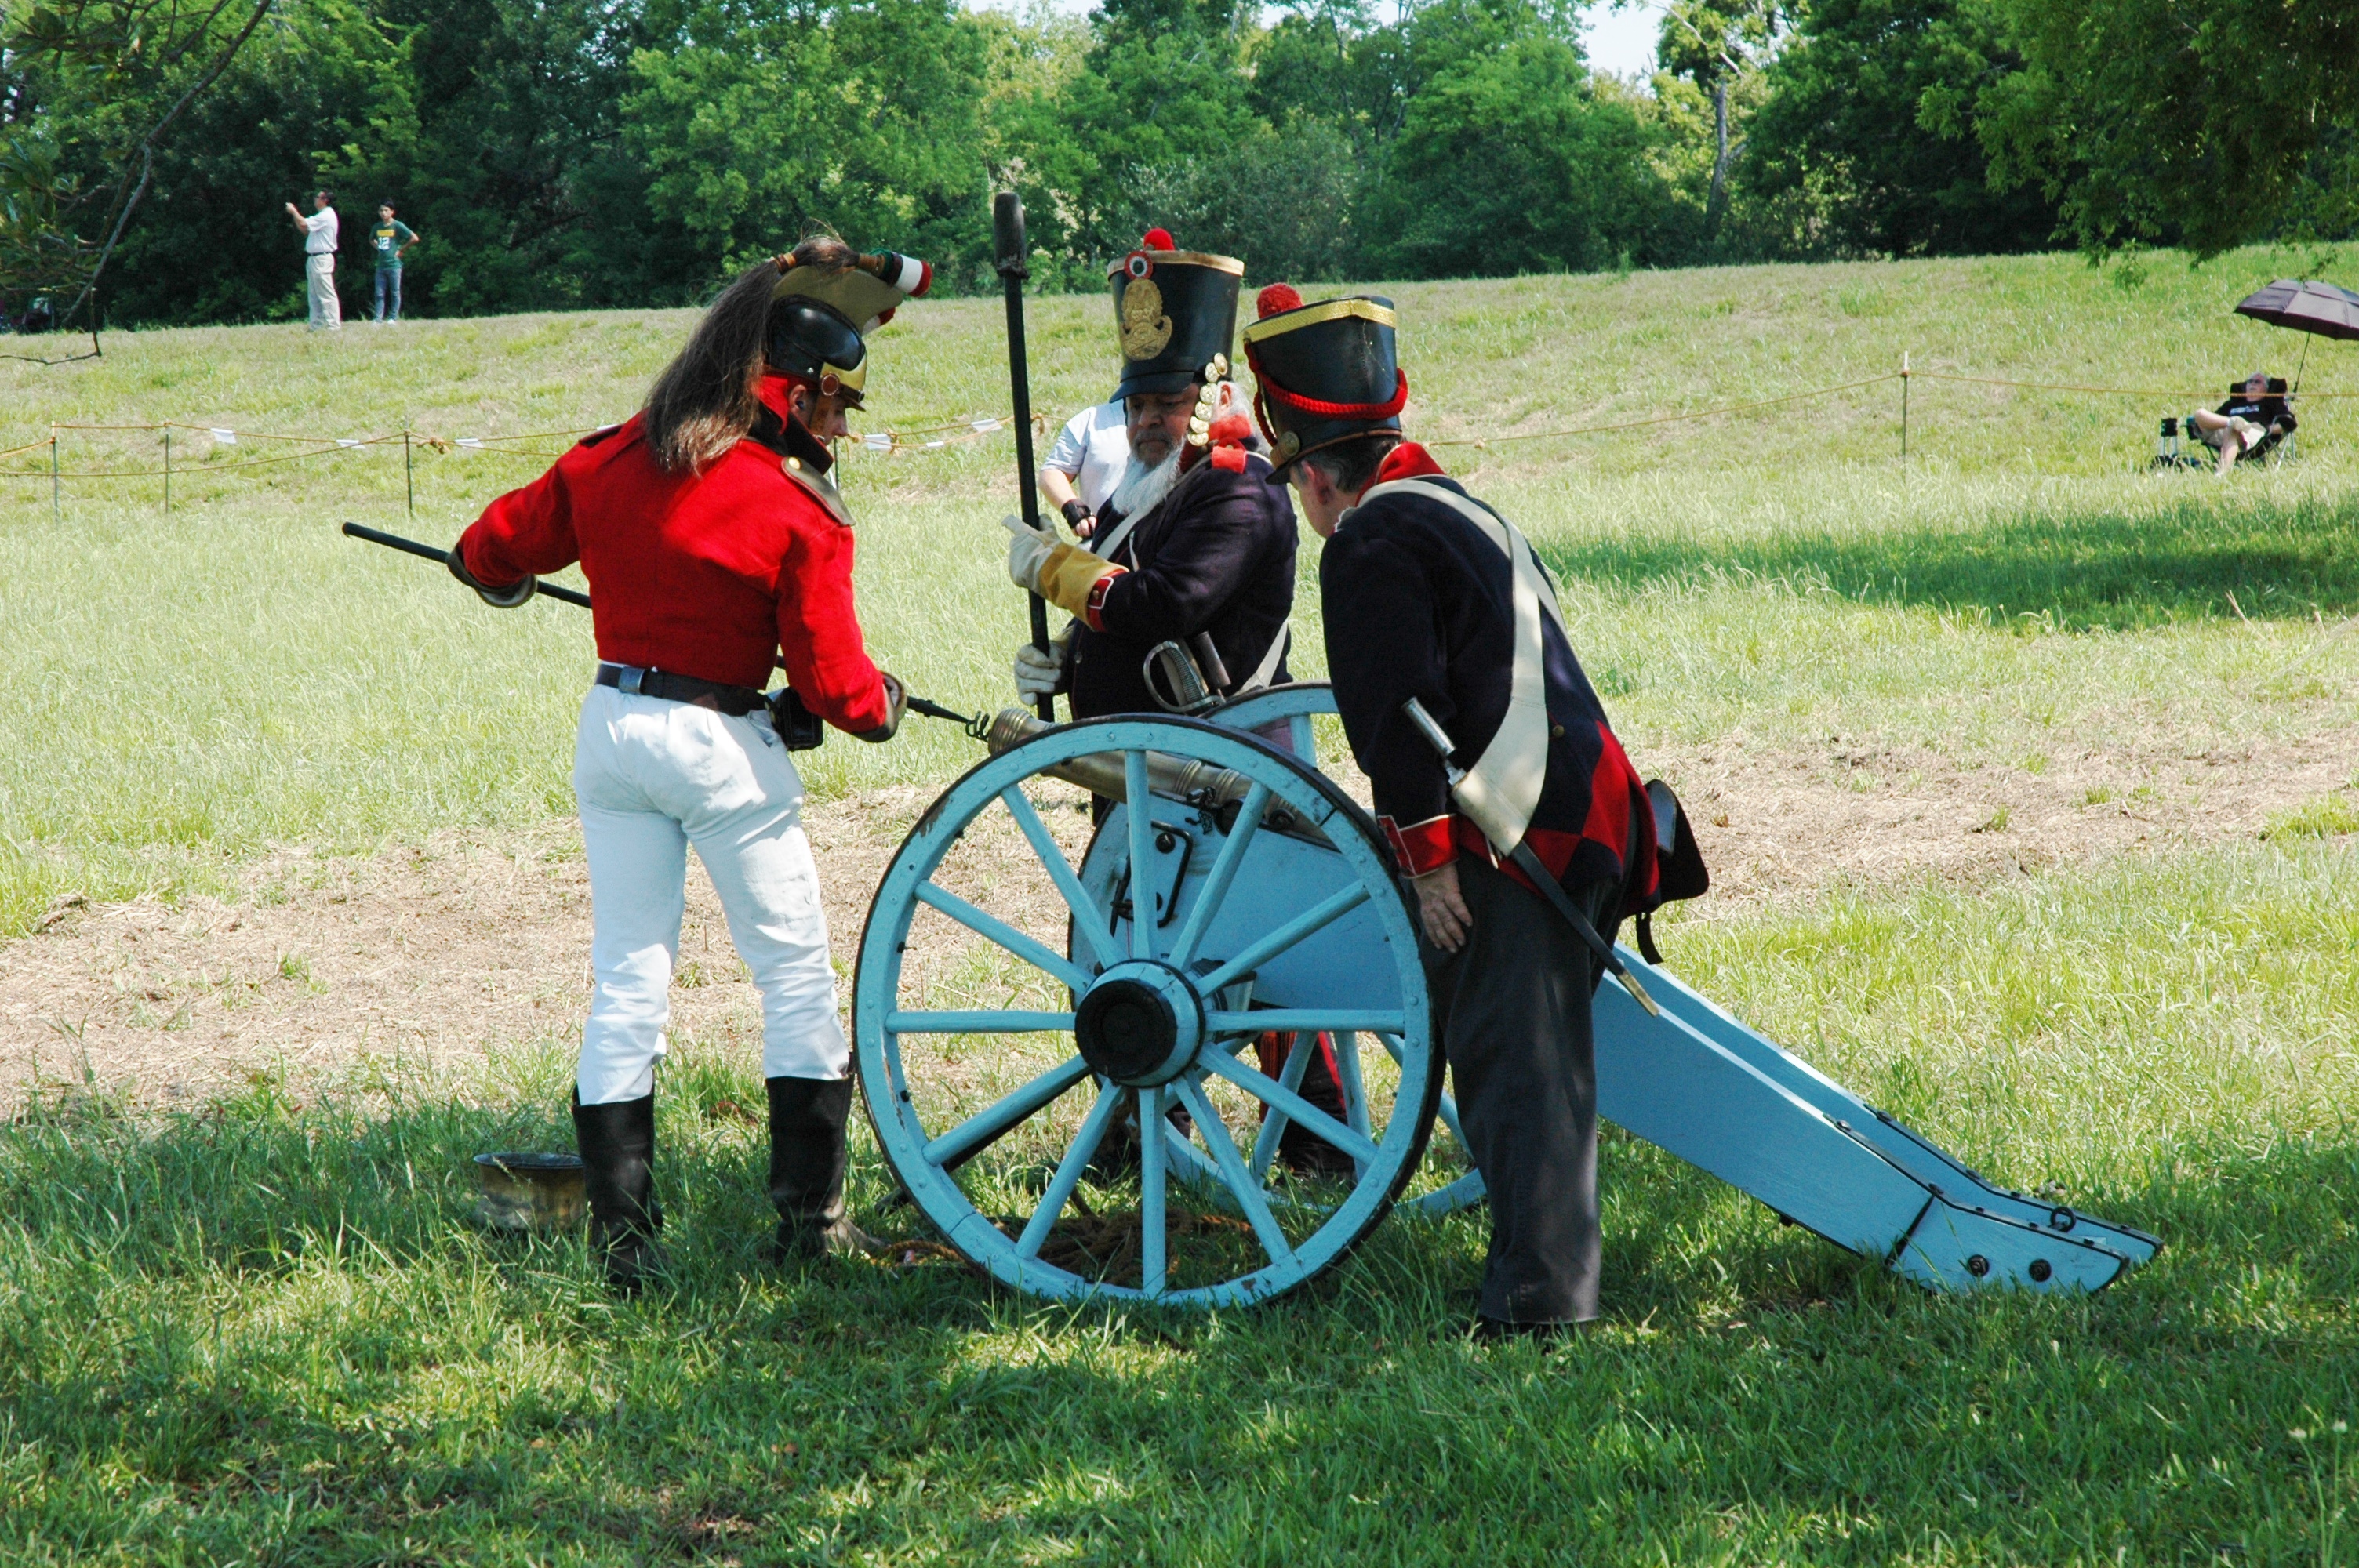 Three men wearing the uniforms of the 1830s Mexican army load a cannon.